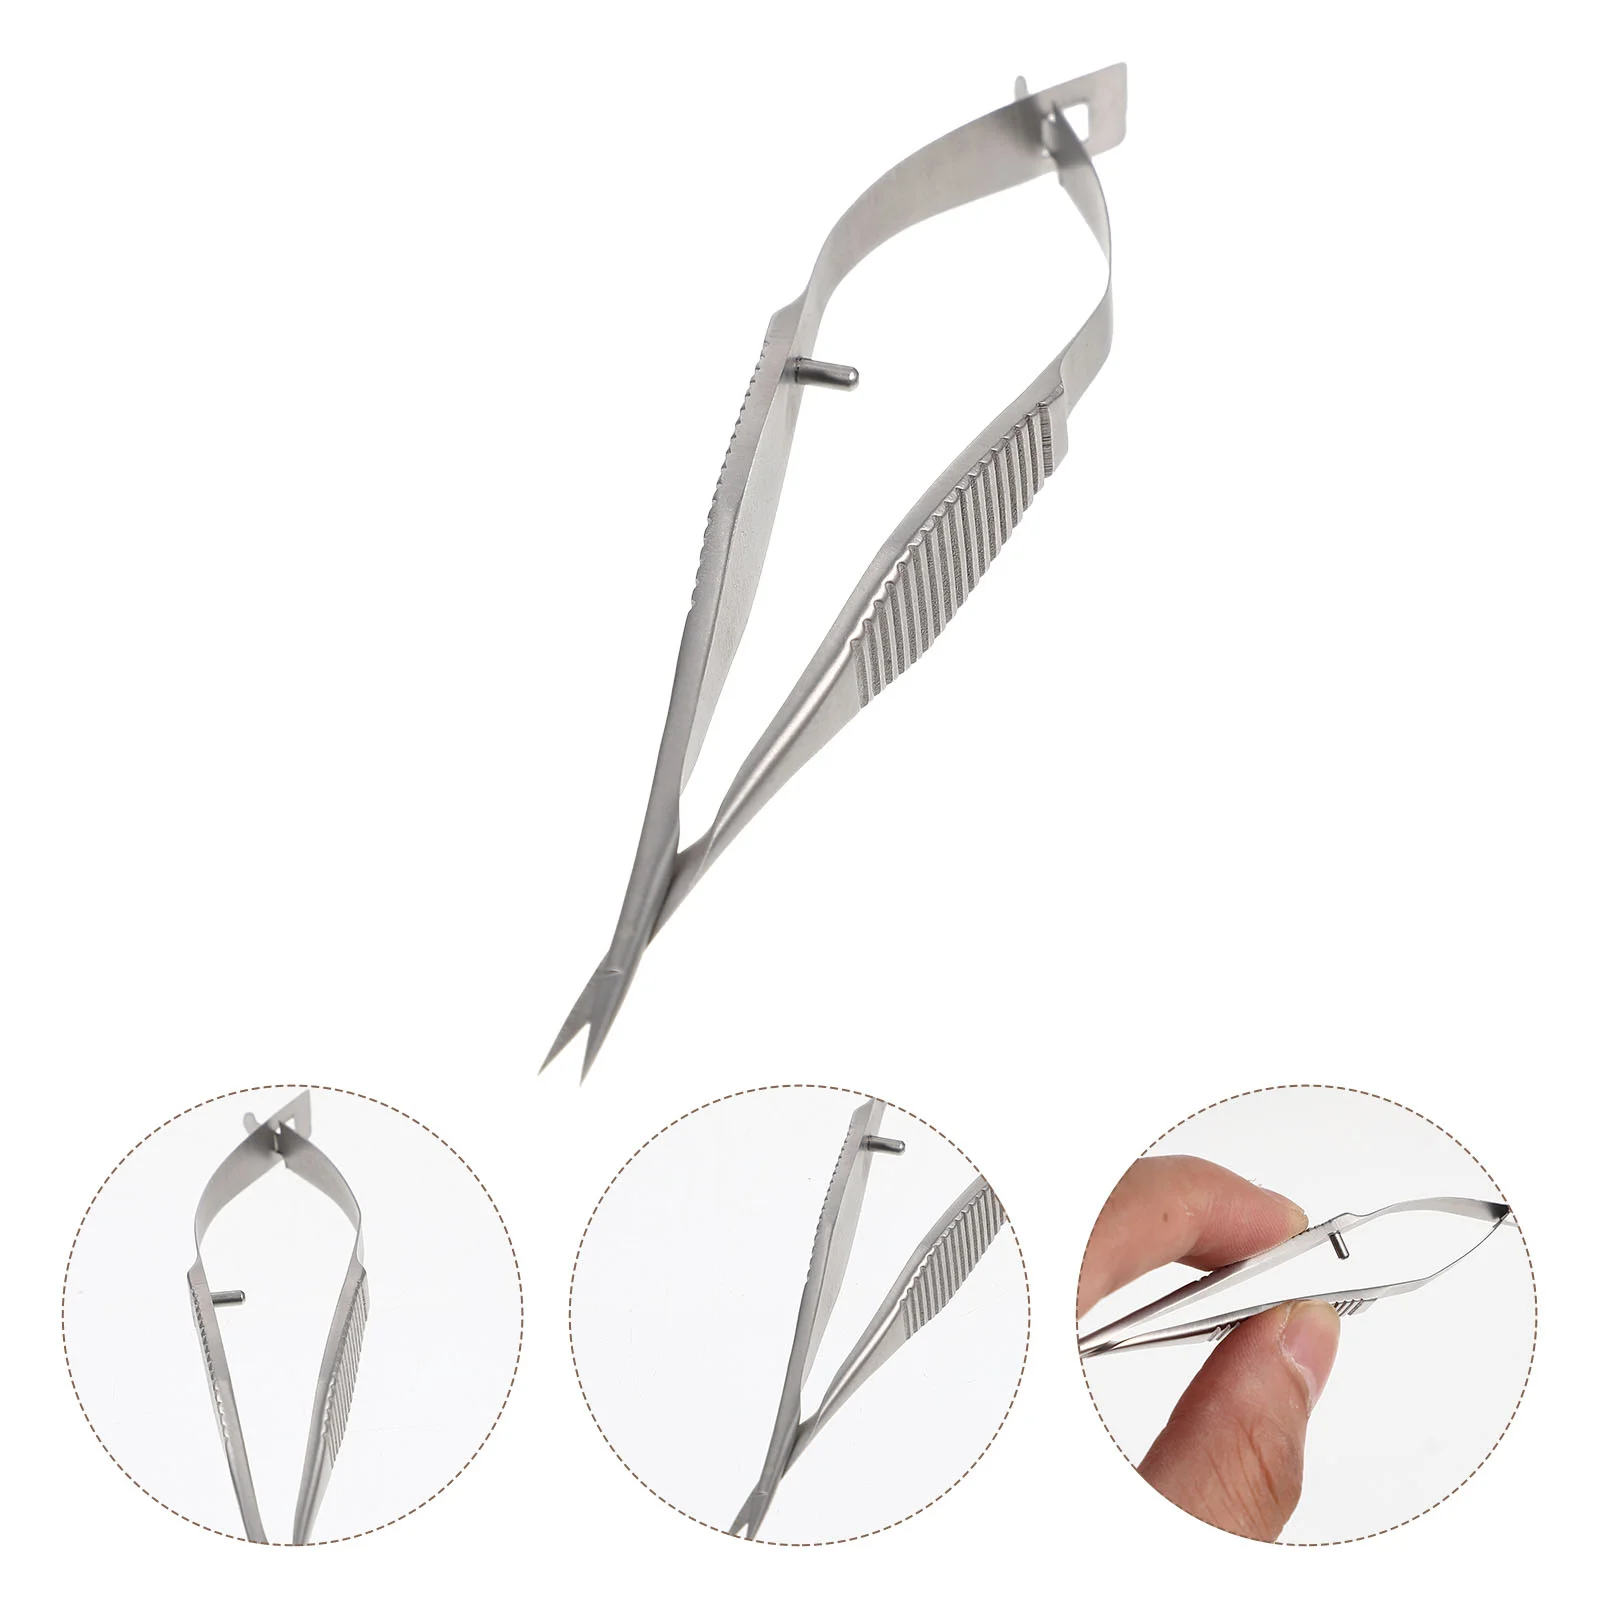 

Scissors Hair Remover Tool Used Removal Stainless Steel Titanium Alloy Medical Doctor's Emergency